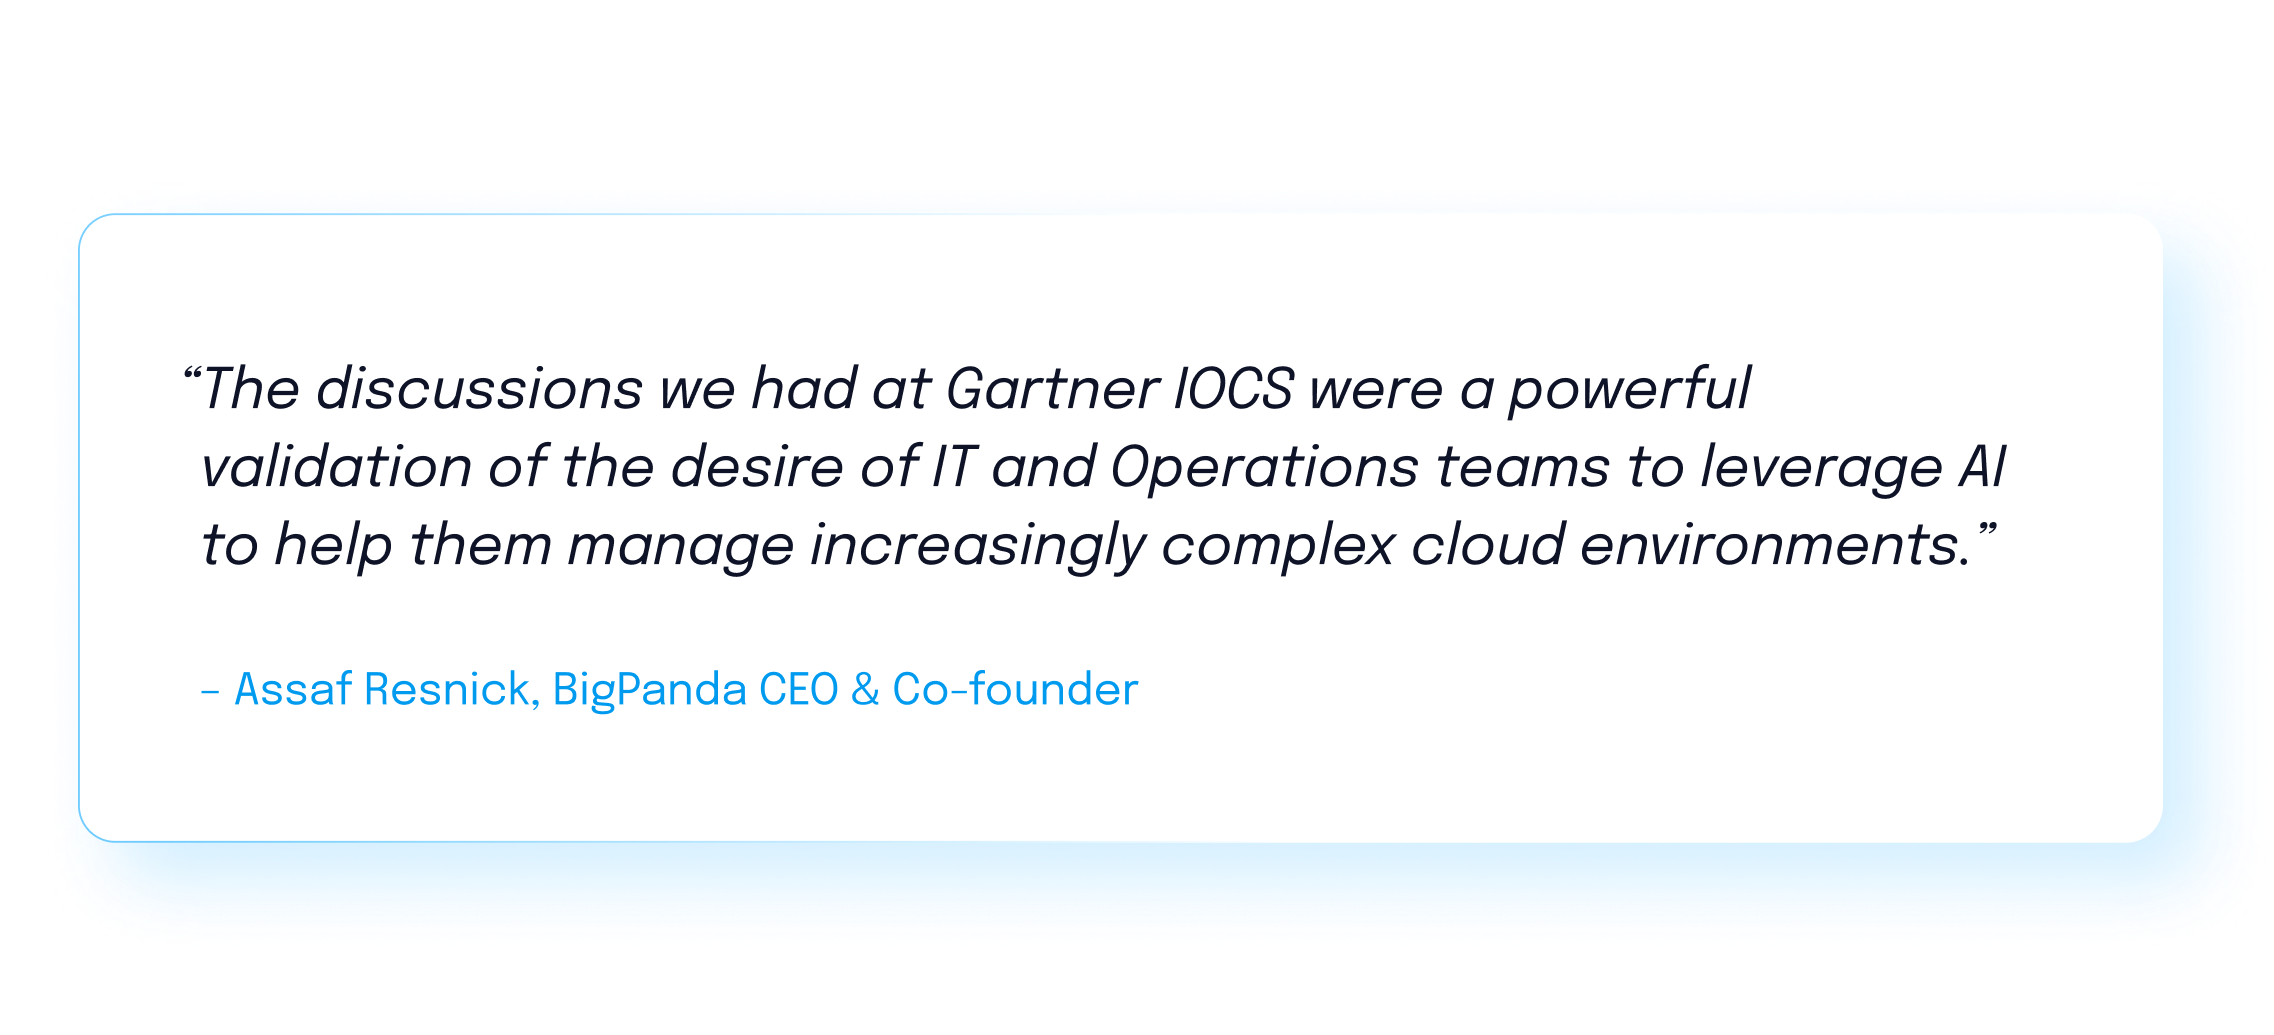 “The discussions we had at Gartner IOCS were a powerful validation of the desire of IT and Operations teams to leverage AI to help them manage increasingly complex cloud environments.” - Assaf Resnick, BigPanda CEO & Co-founder